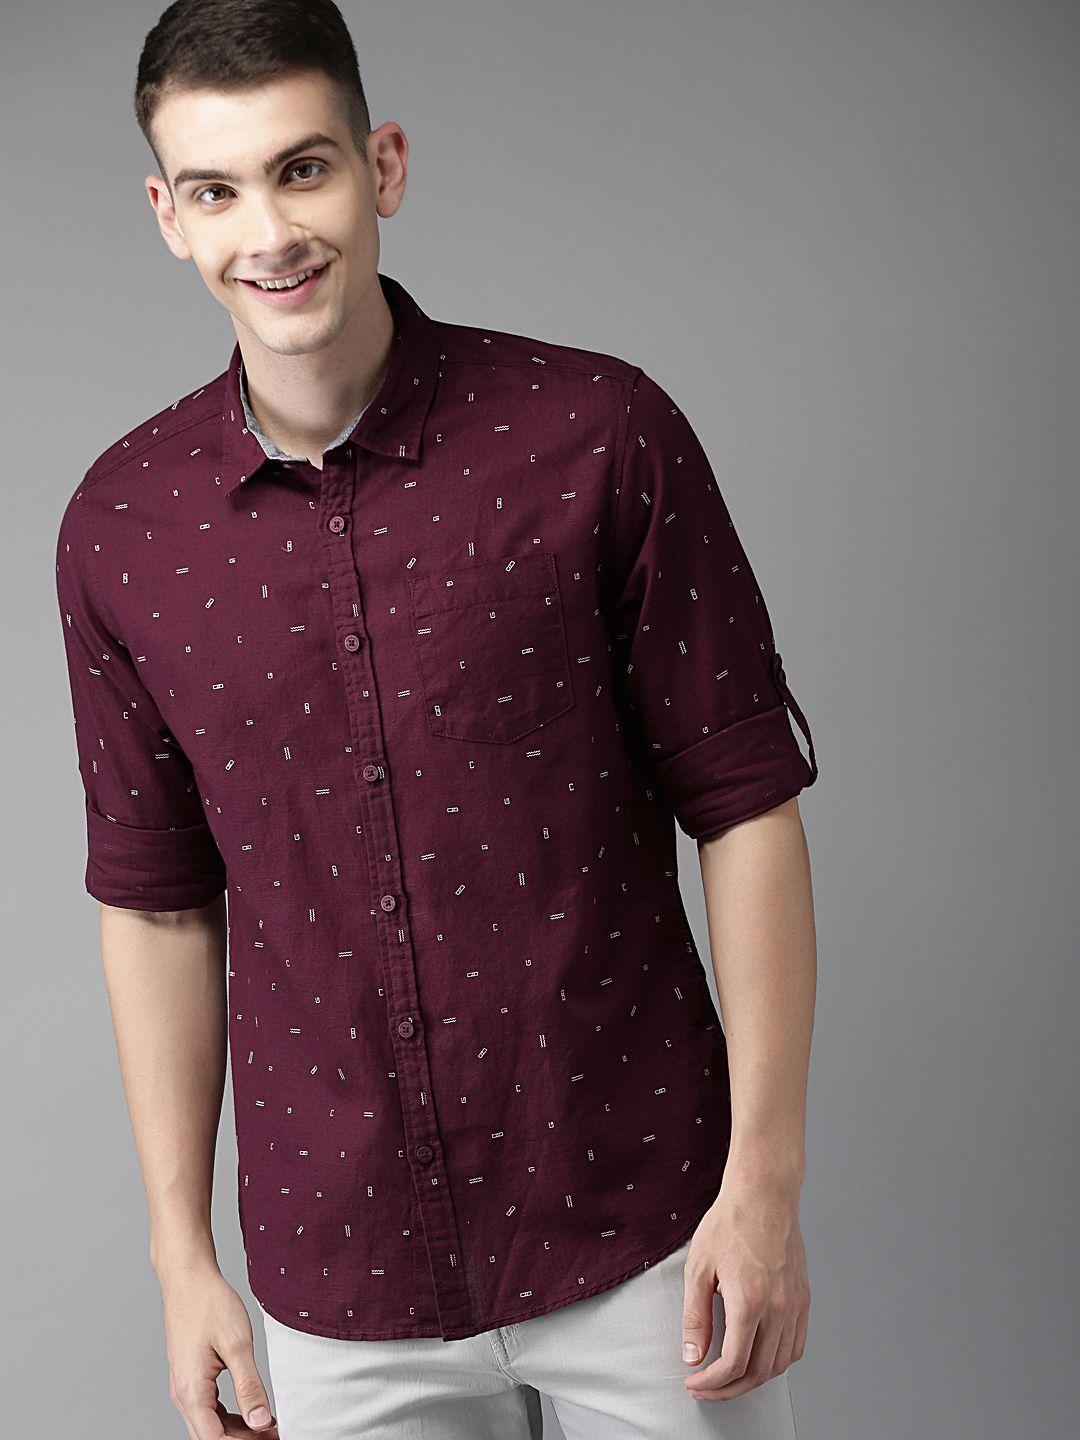 here&now men maroon & white printed casual shirt